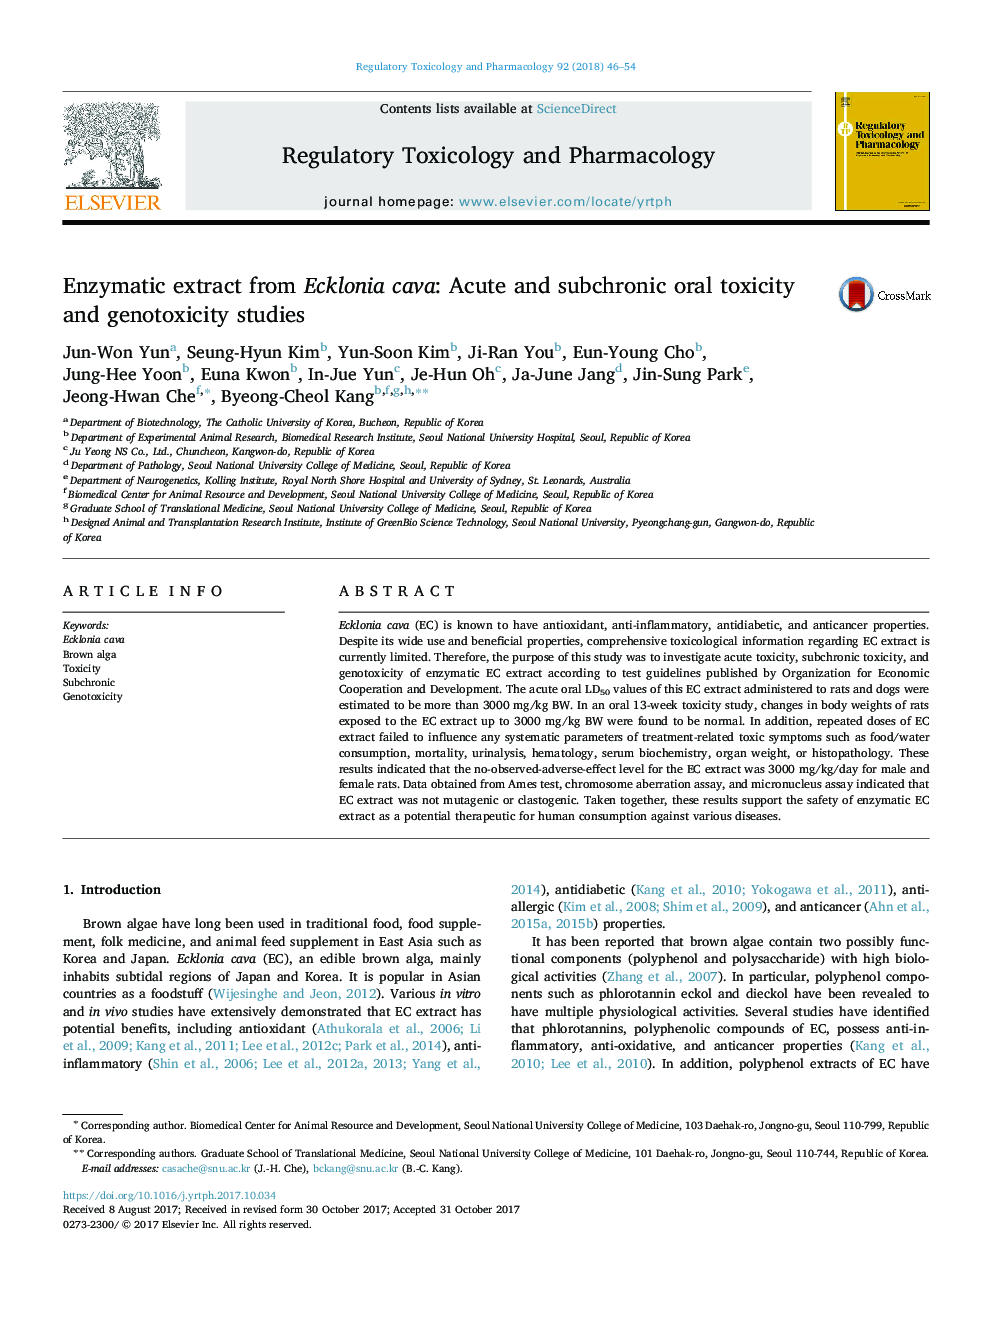 Enzymatic extract from Ecklonia cava: Acute and subchronic oral toxicity and genotoxicity studies